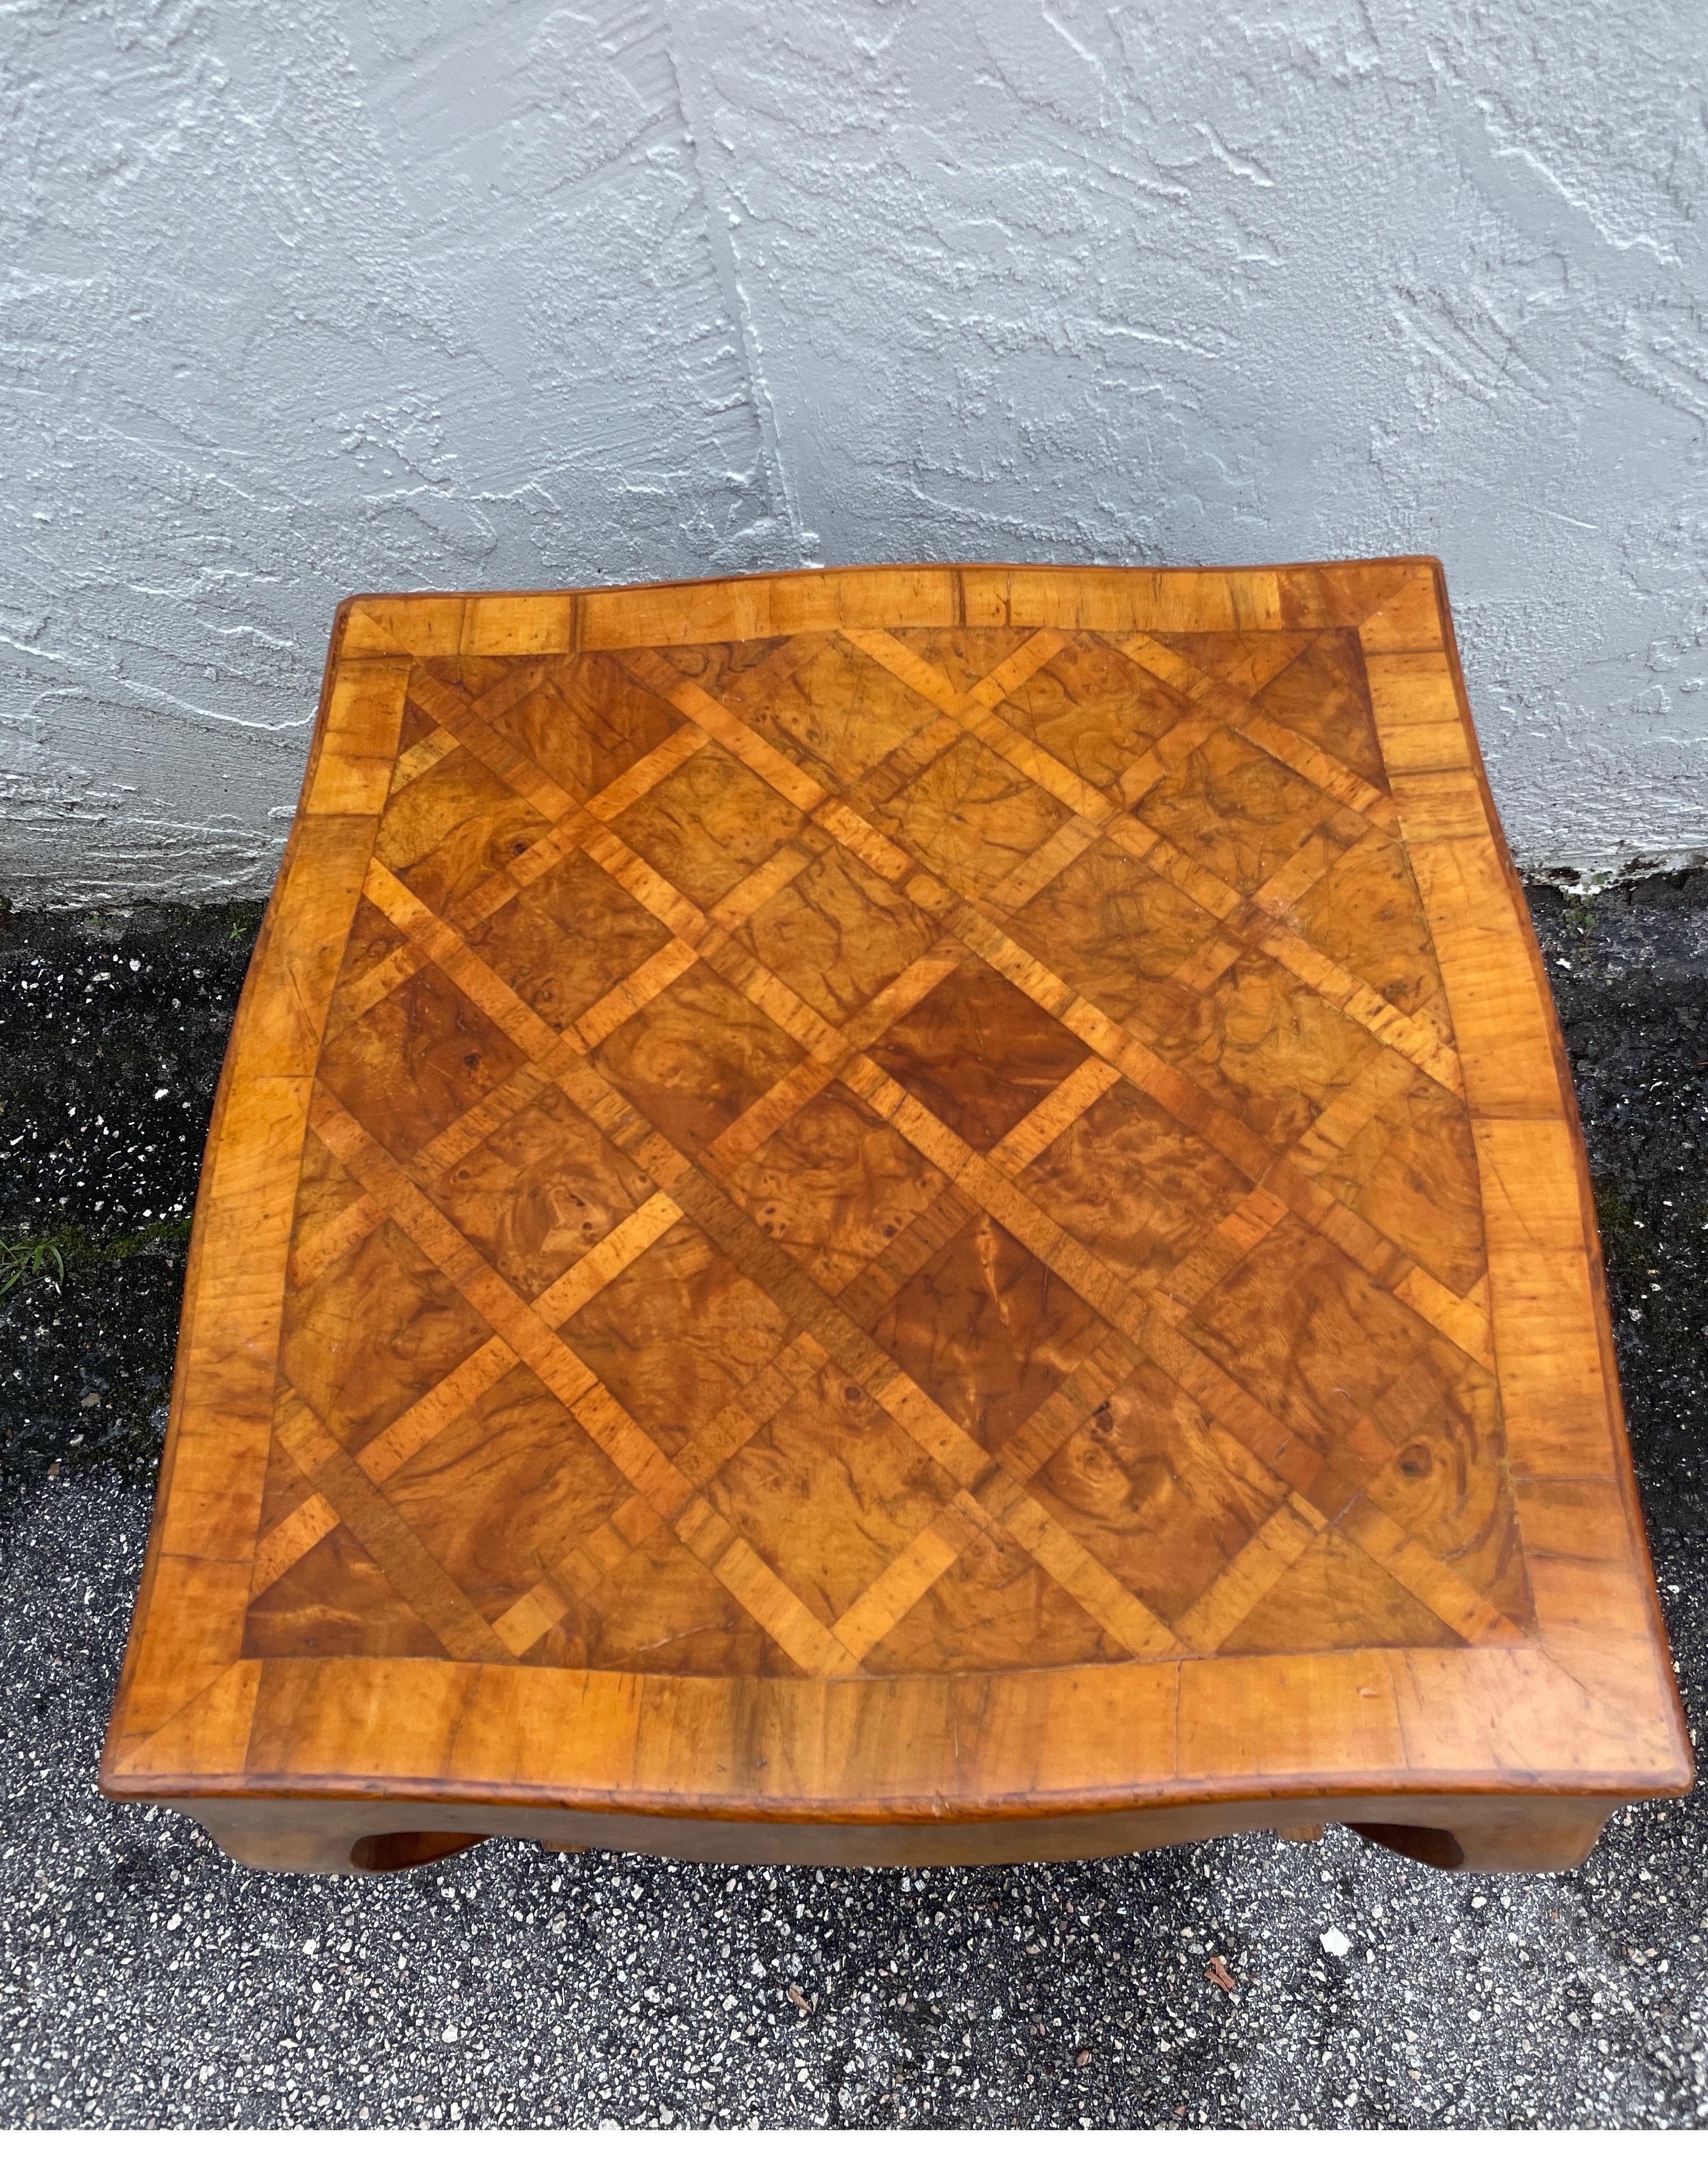 Vintage Italian Olivewood side table with cabriole legs. The table has an olivewood parquet top with a scalloped apron.